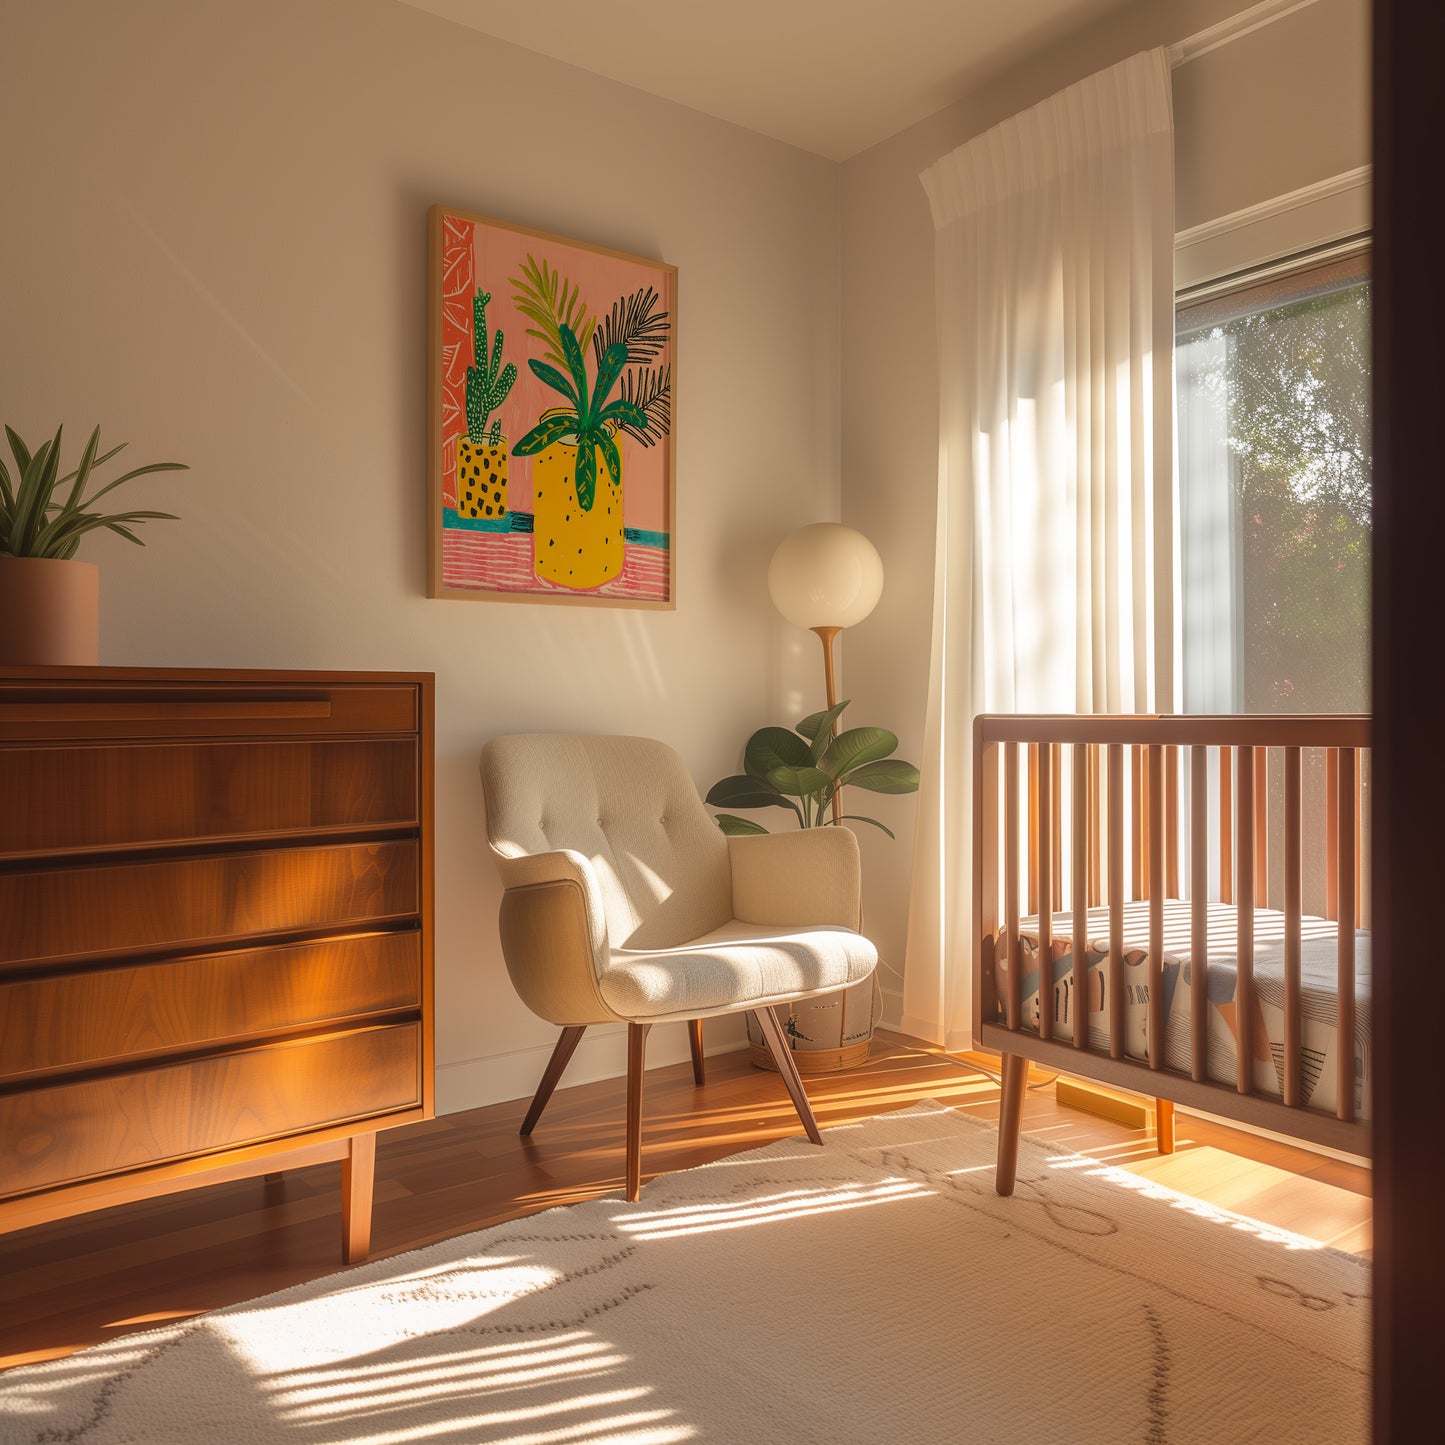 A cozy nursery room with a crib, armchair, and a plant during golden hour.